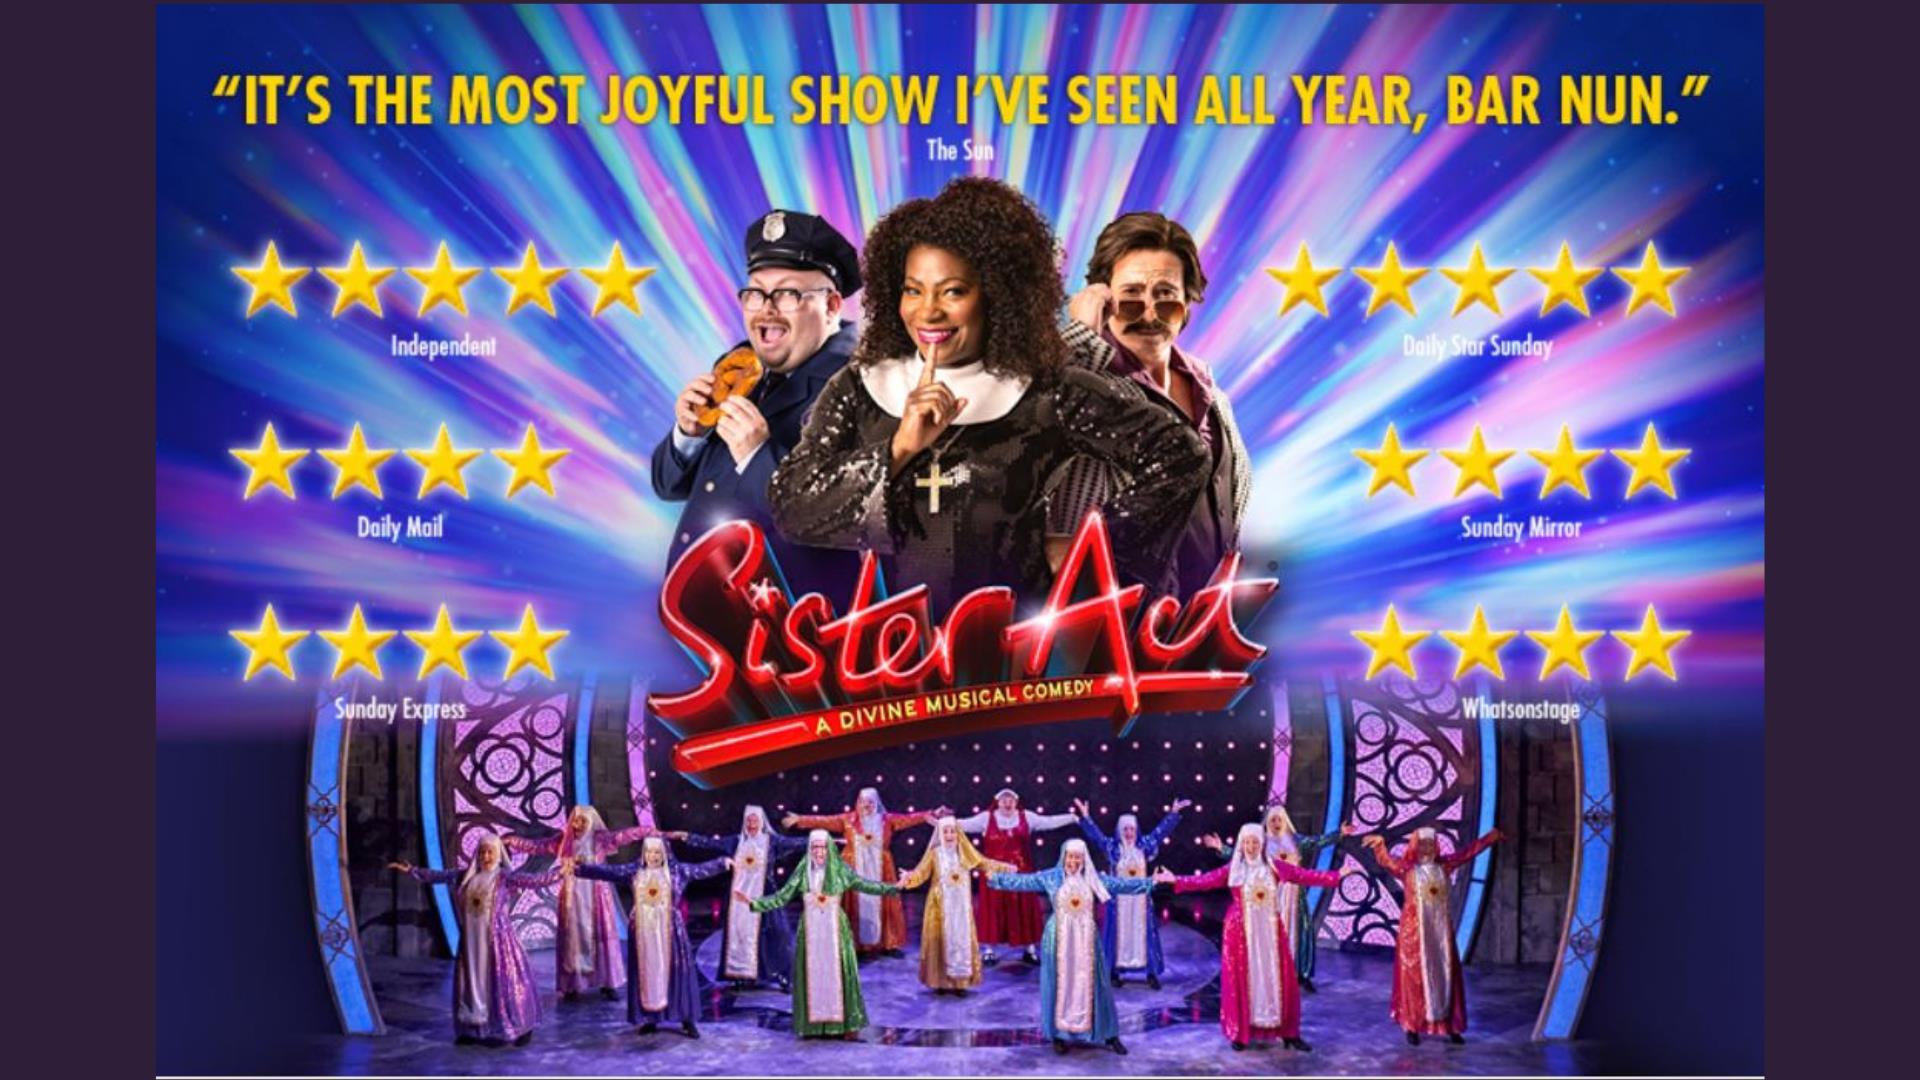 Promo for performance of Sister Act in Millennium Forum Derry